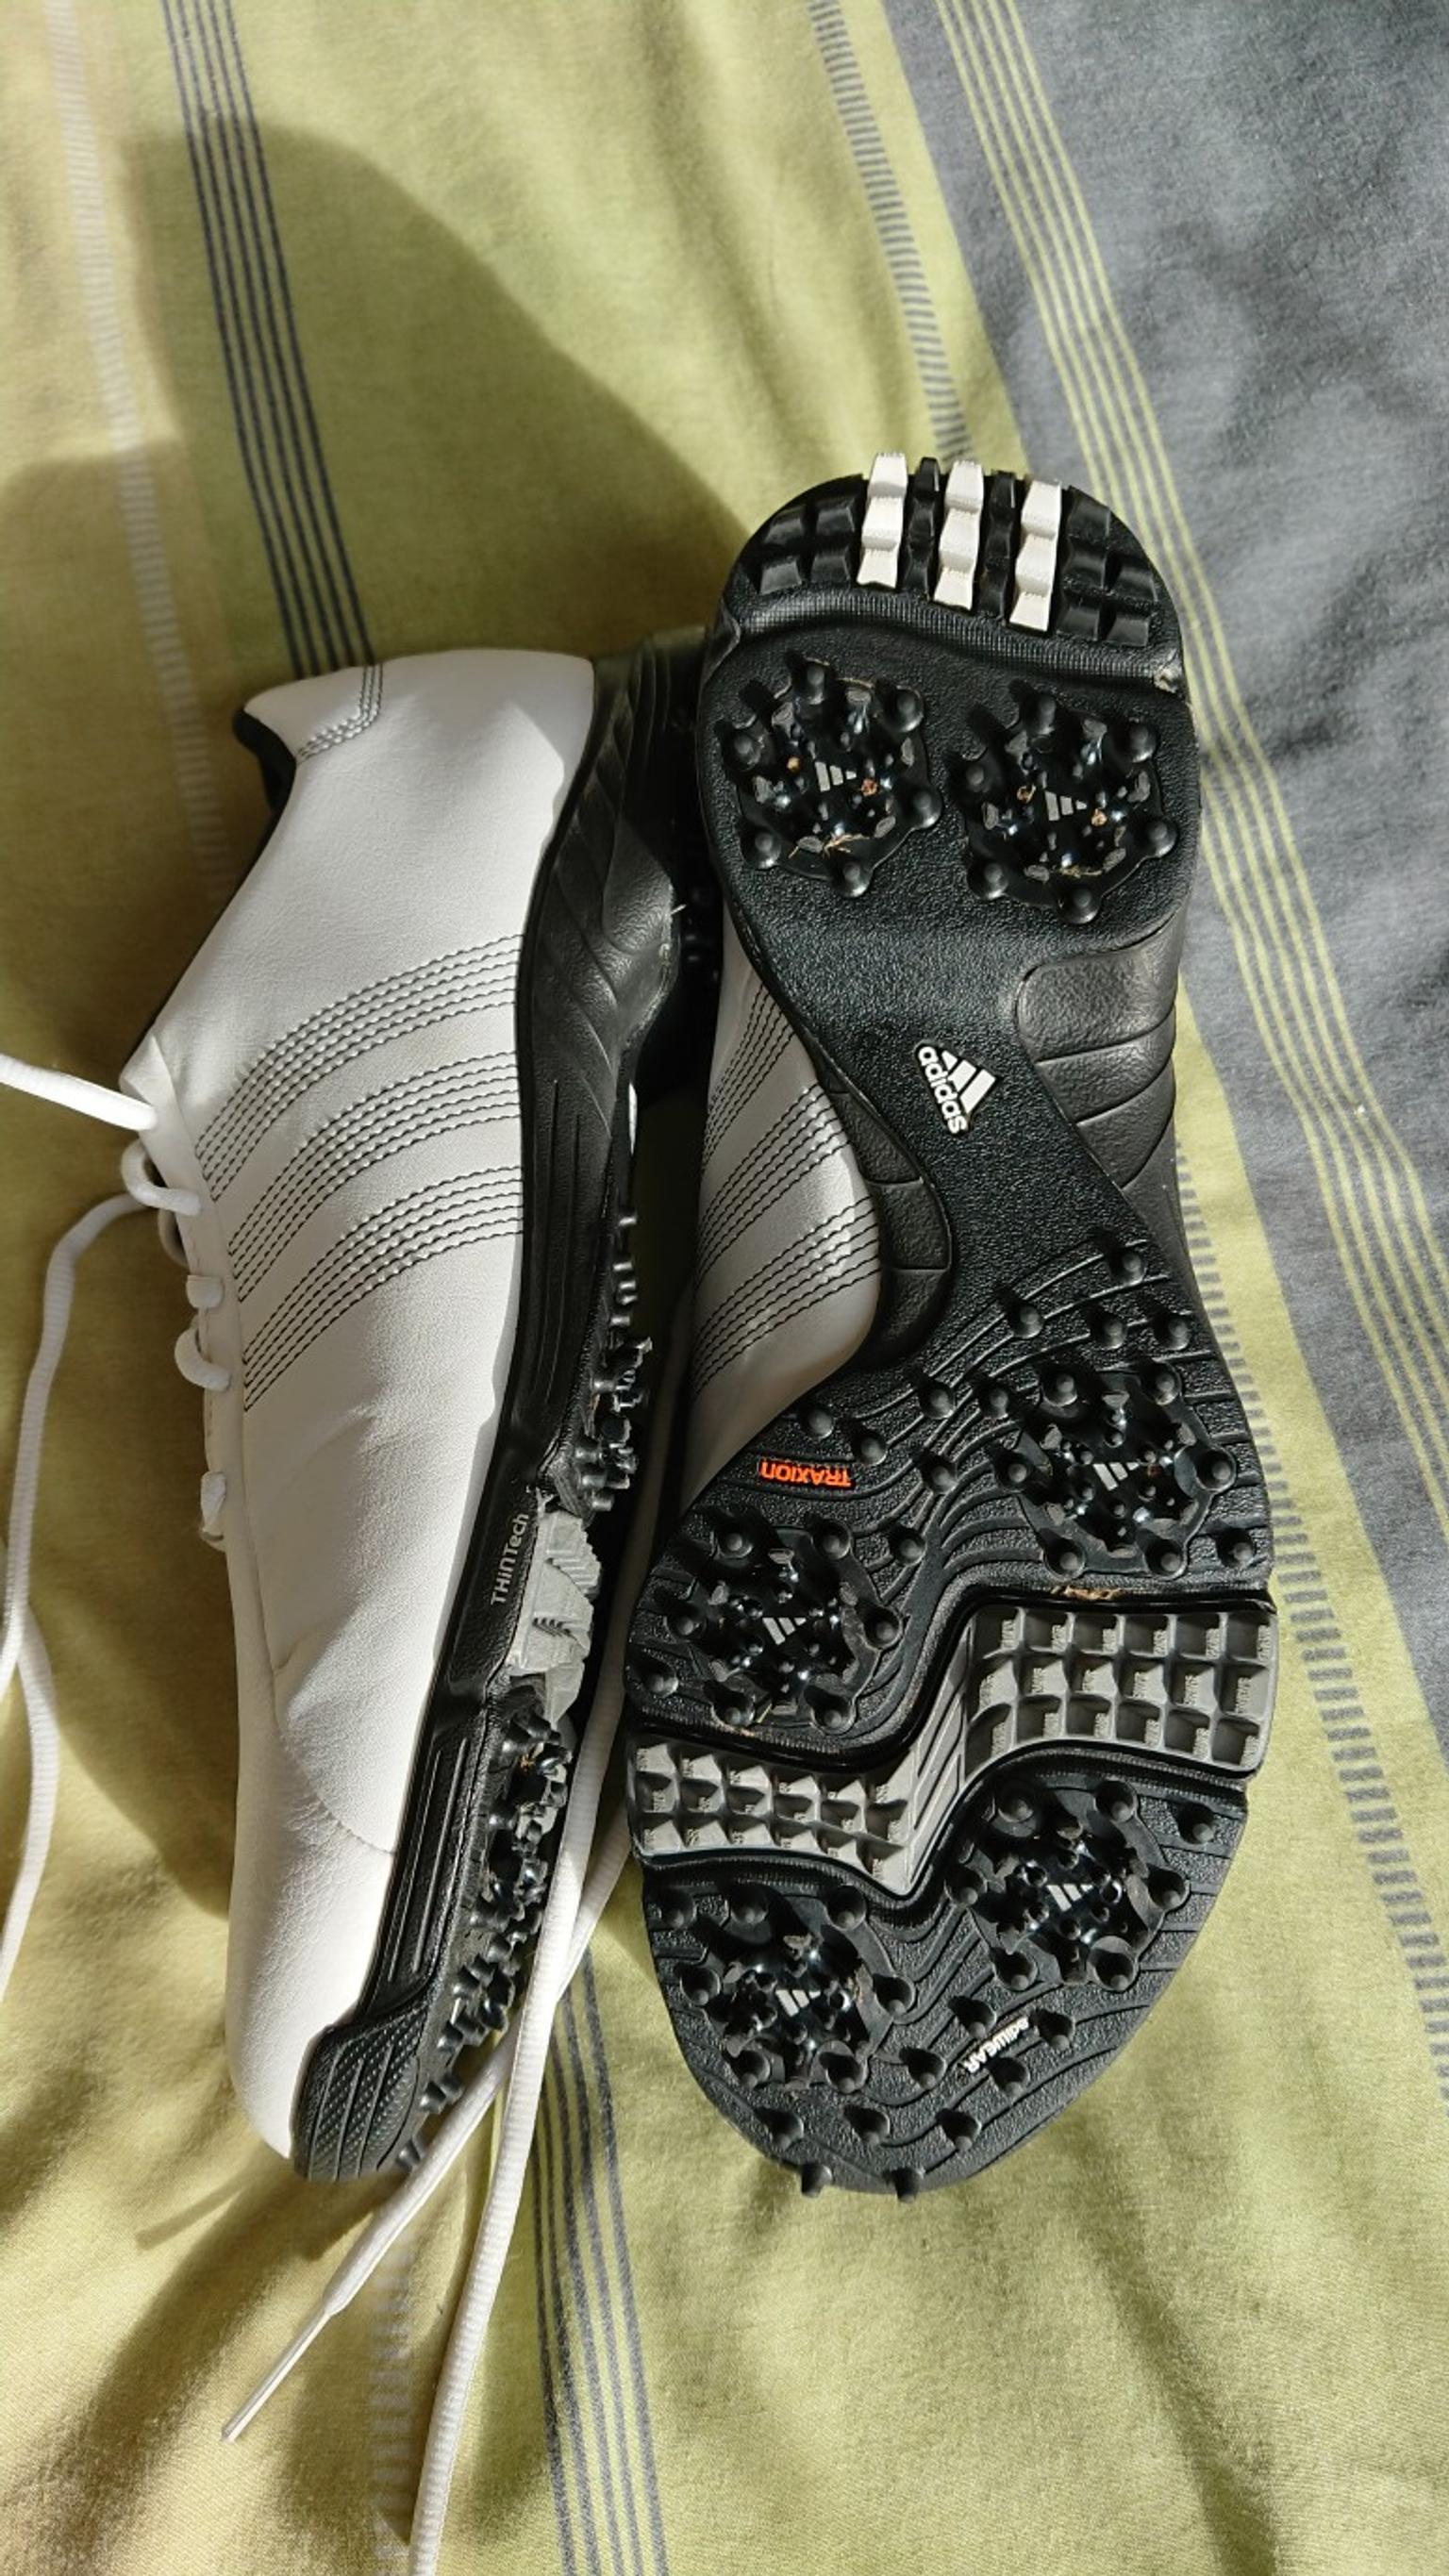 Adidas THiNTech Golf shoes Size 9 in CV21 Rugby for £10.00 for sale | Shpock